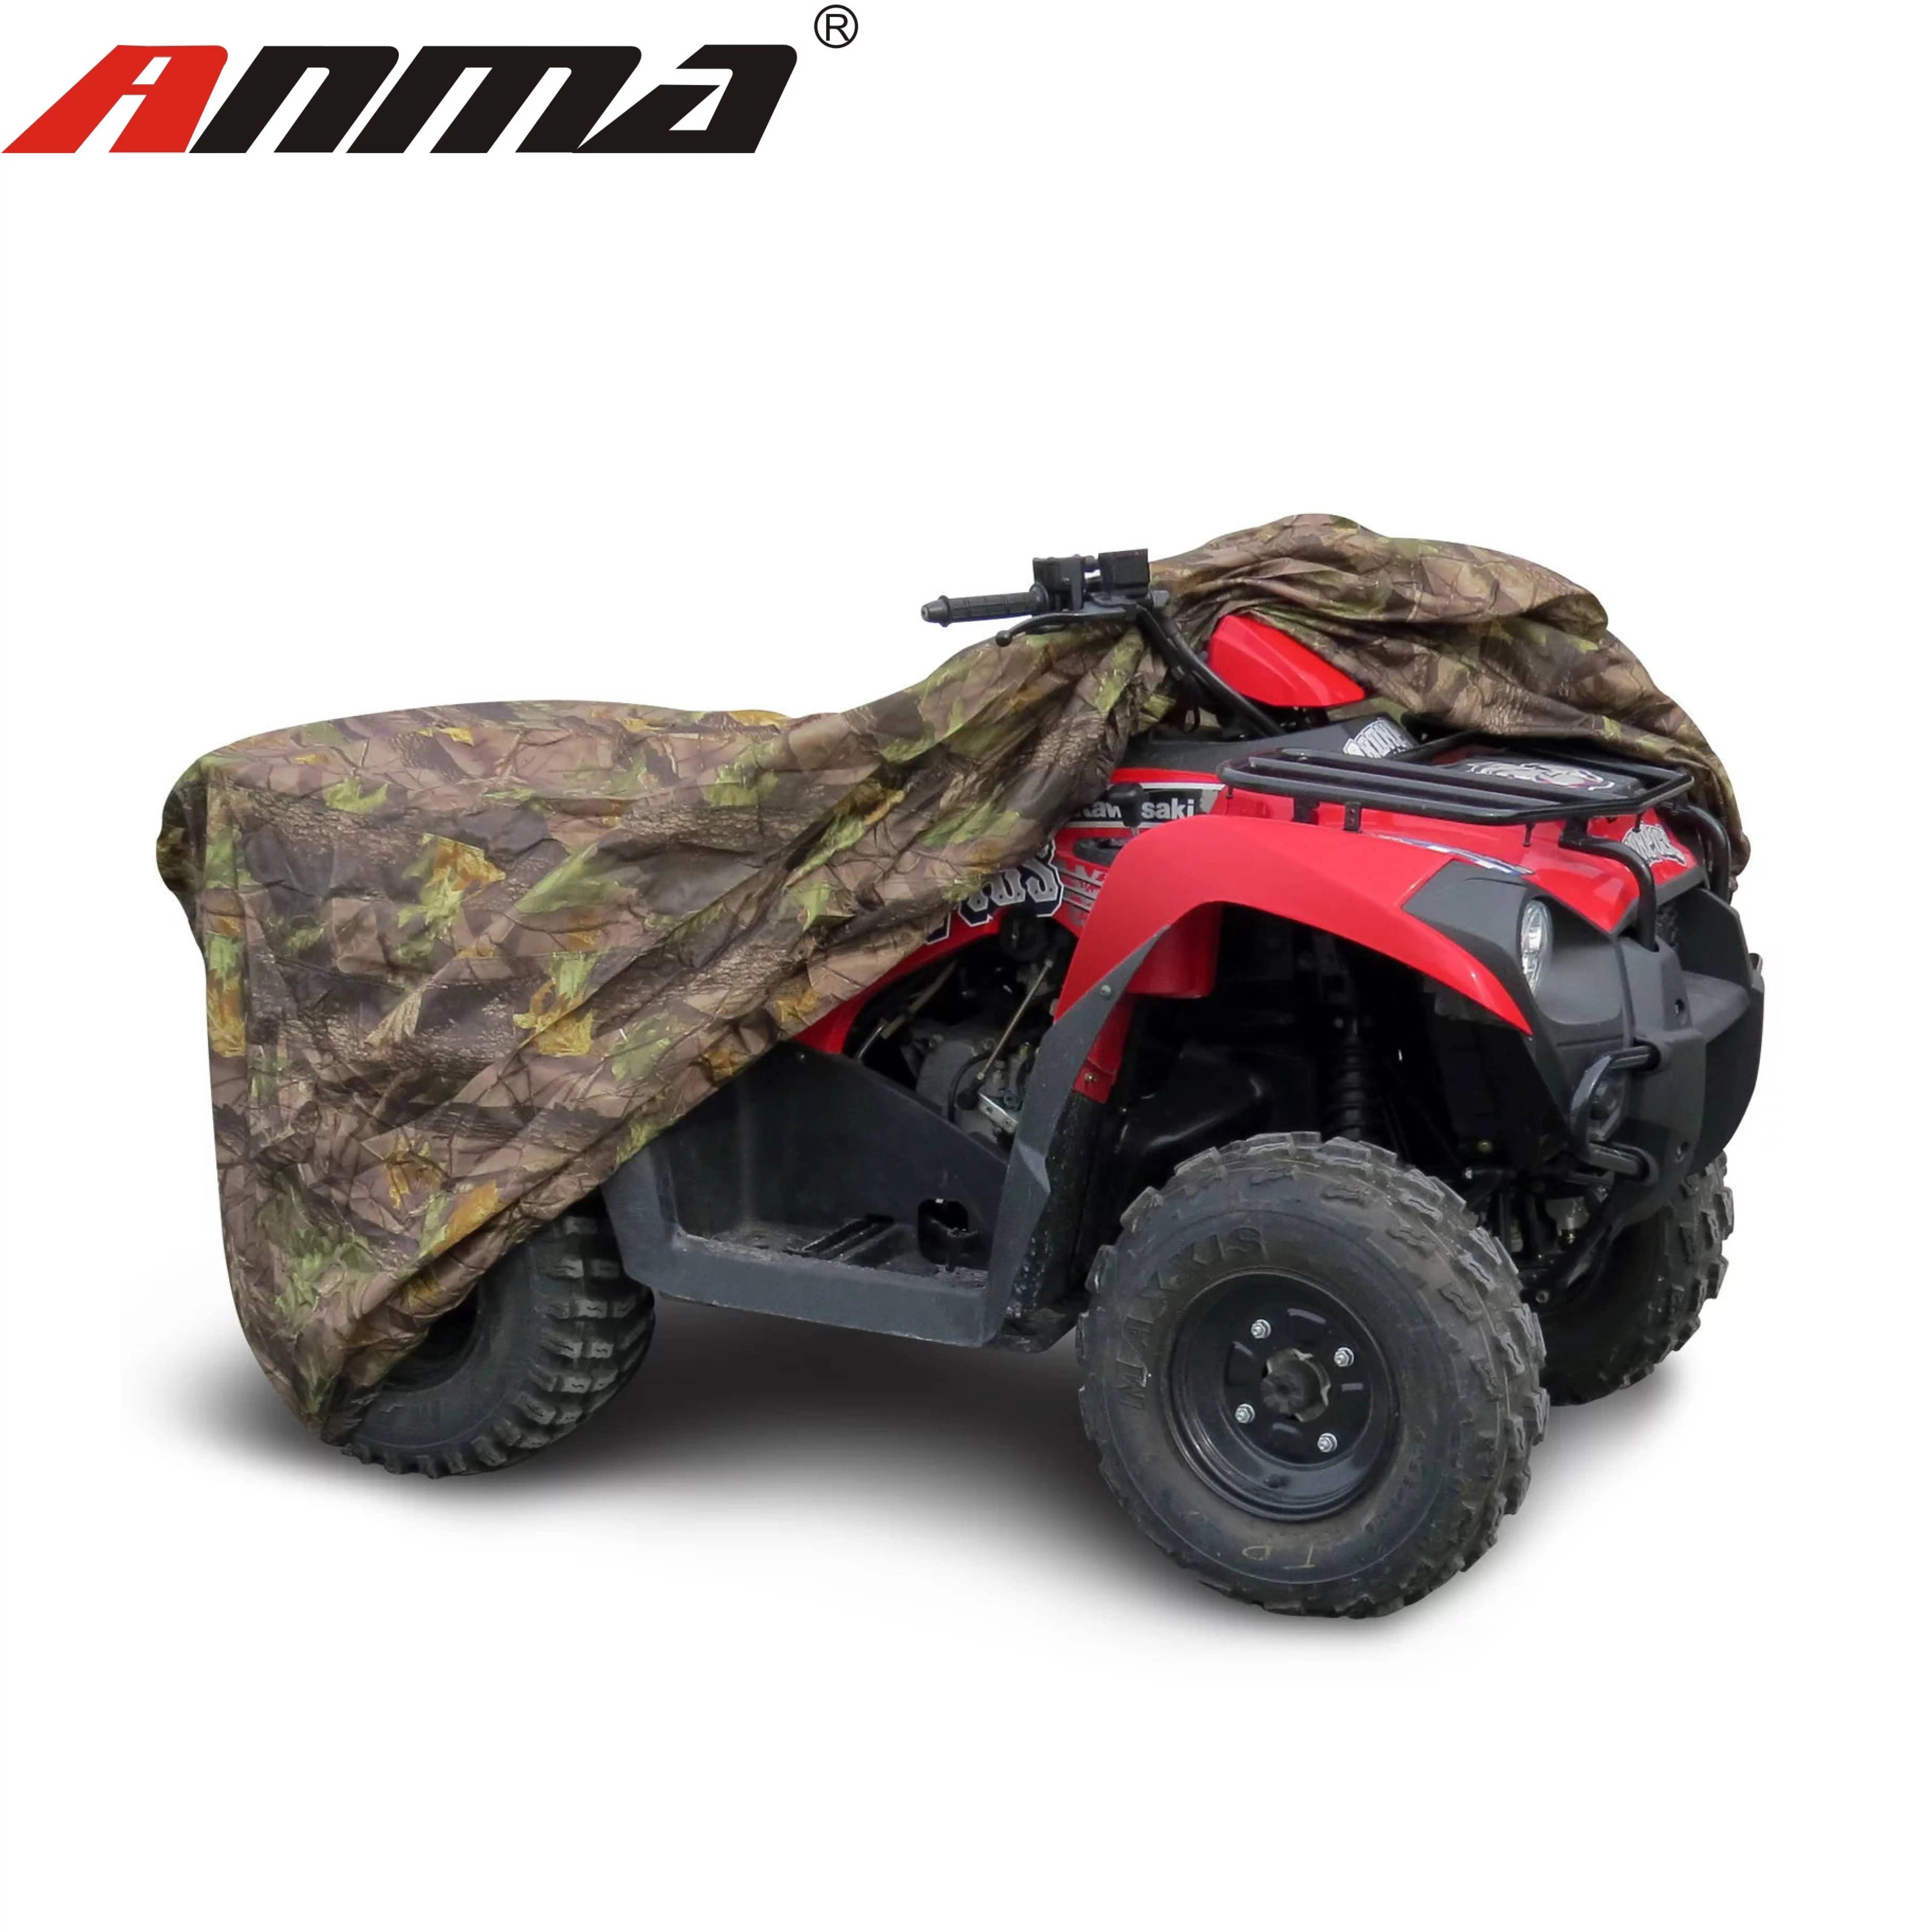 Dustproof Waterproof Snow Rain or Sun Weather Proof Outdoor UV Protection Quad Bike Cover, Fits Most ATV Vehicles